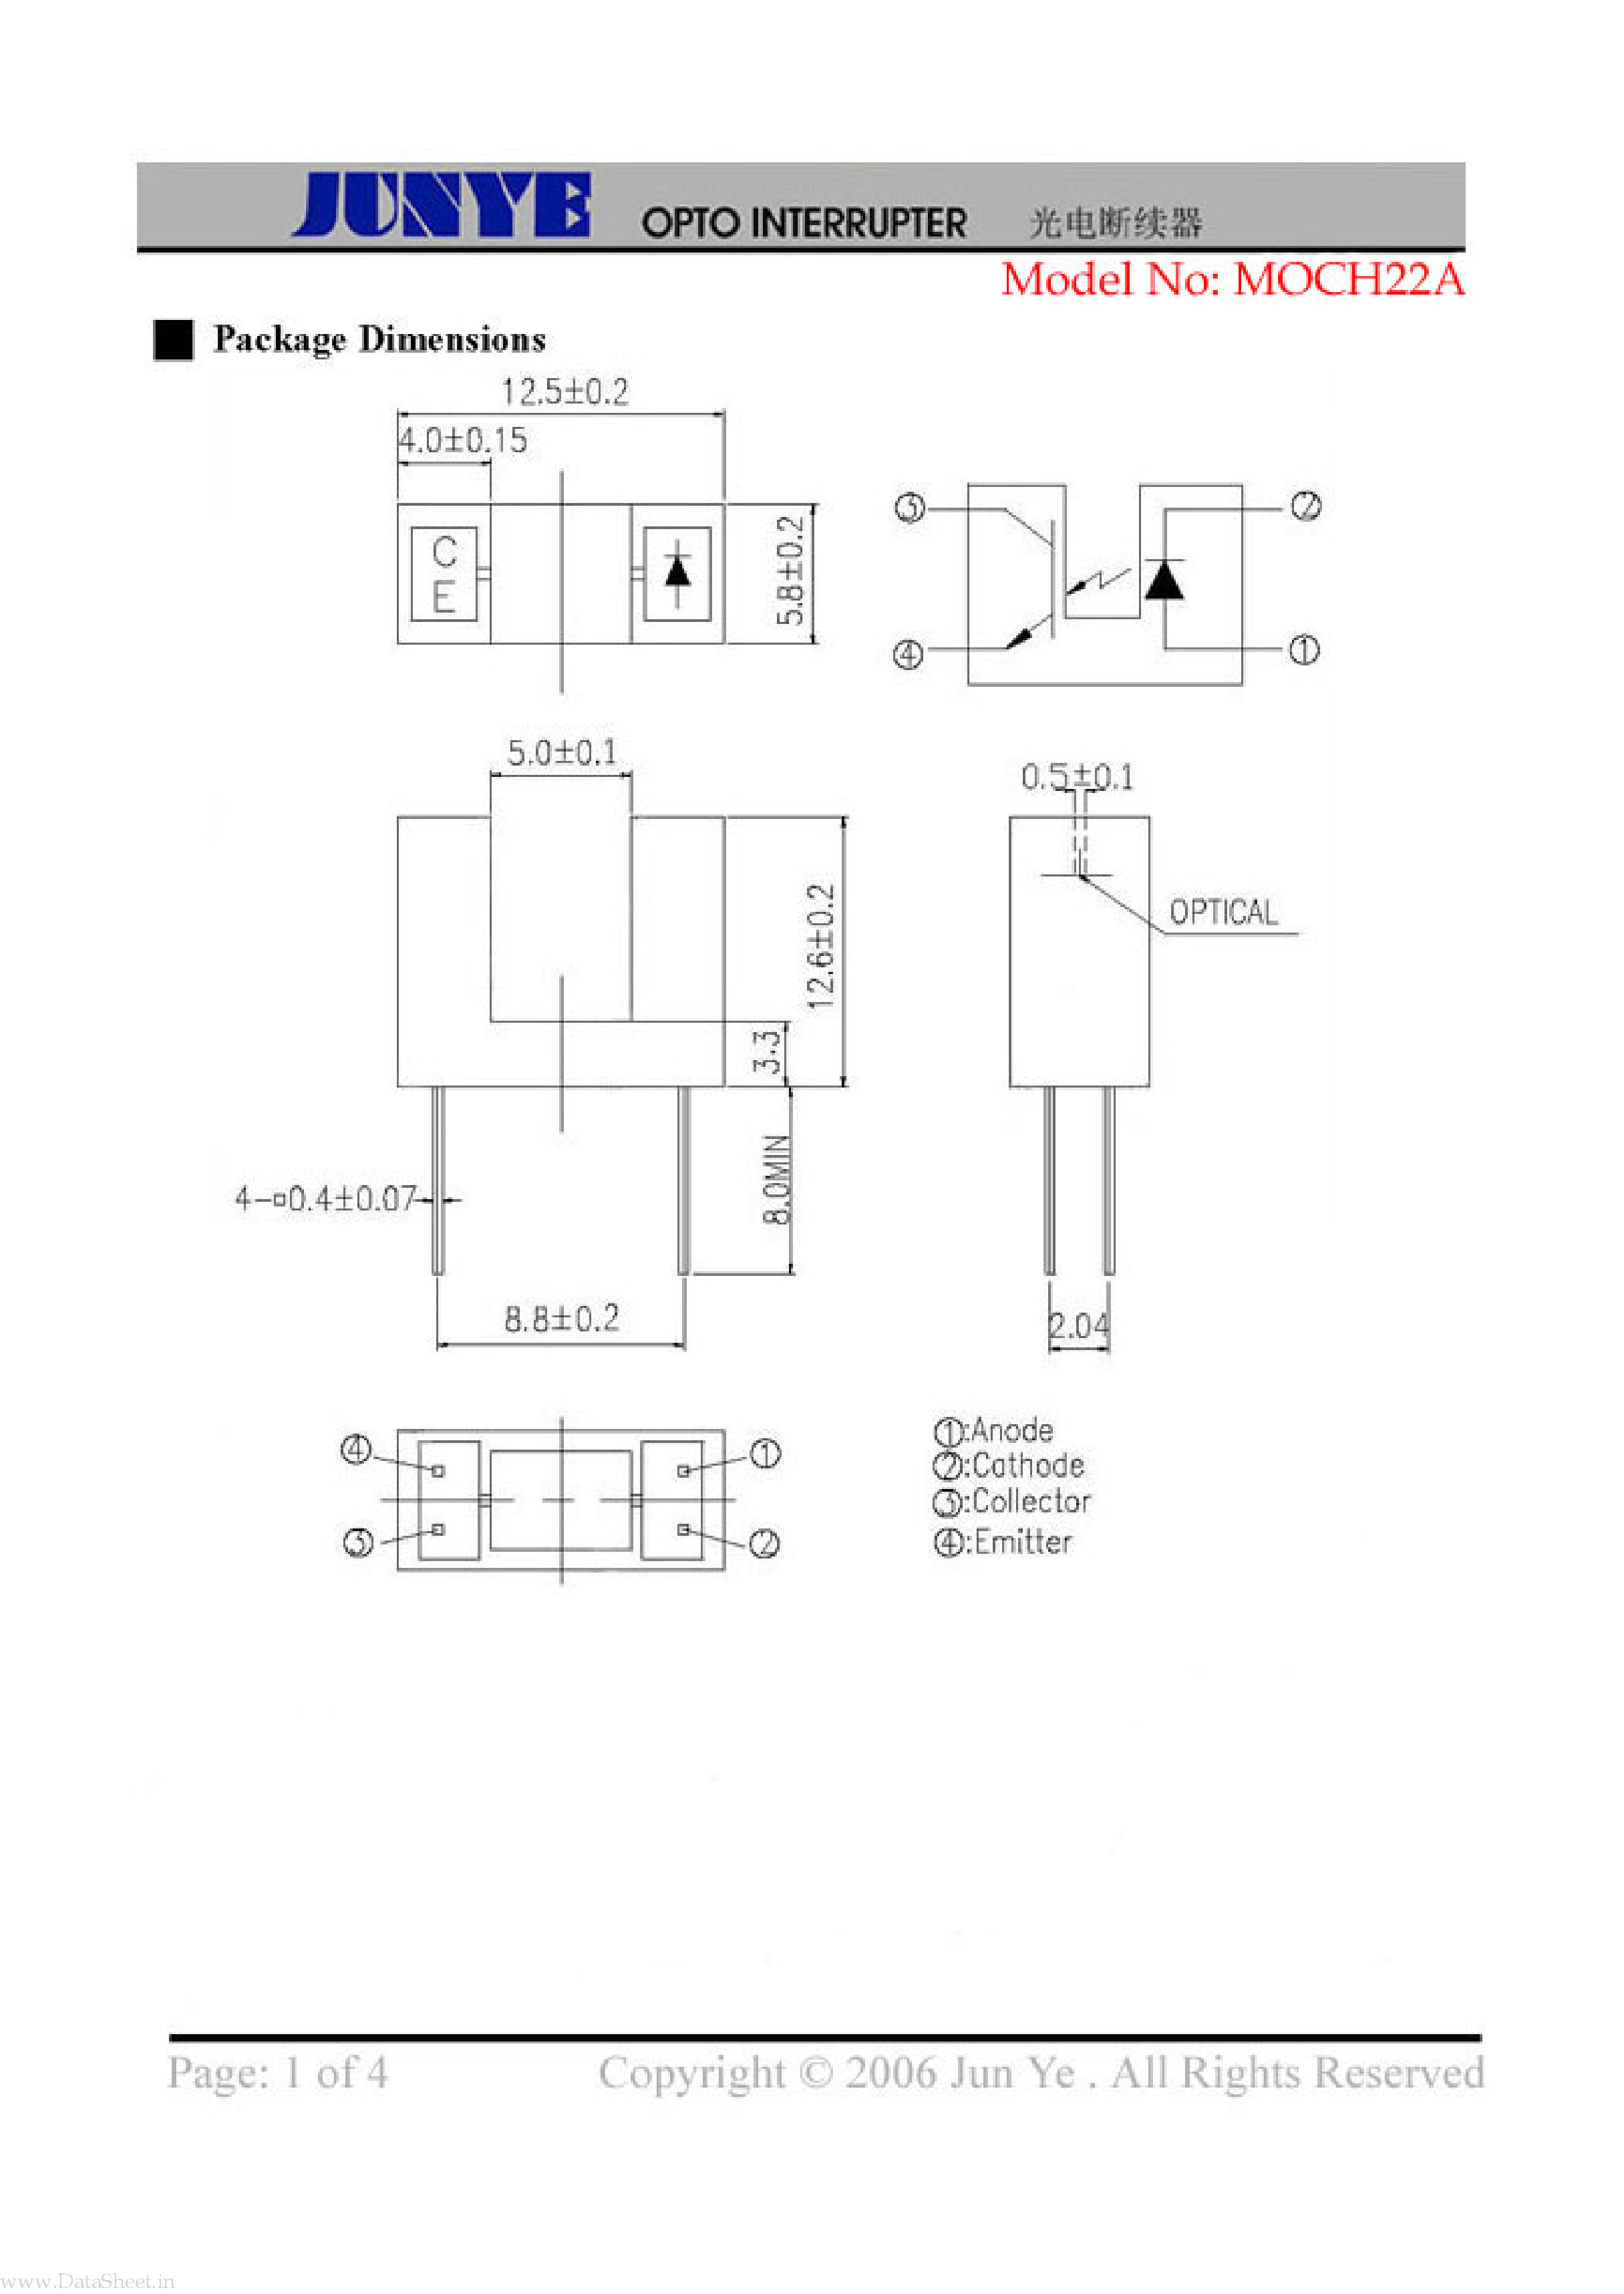 Datasheet MOCH22A - OPTO Interrupter page 1